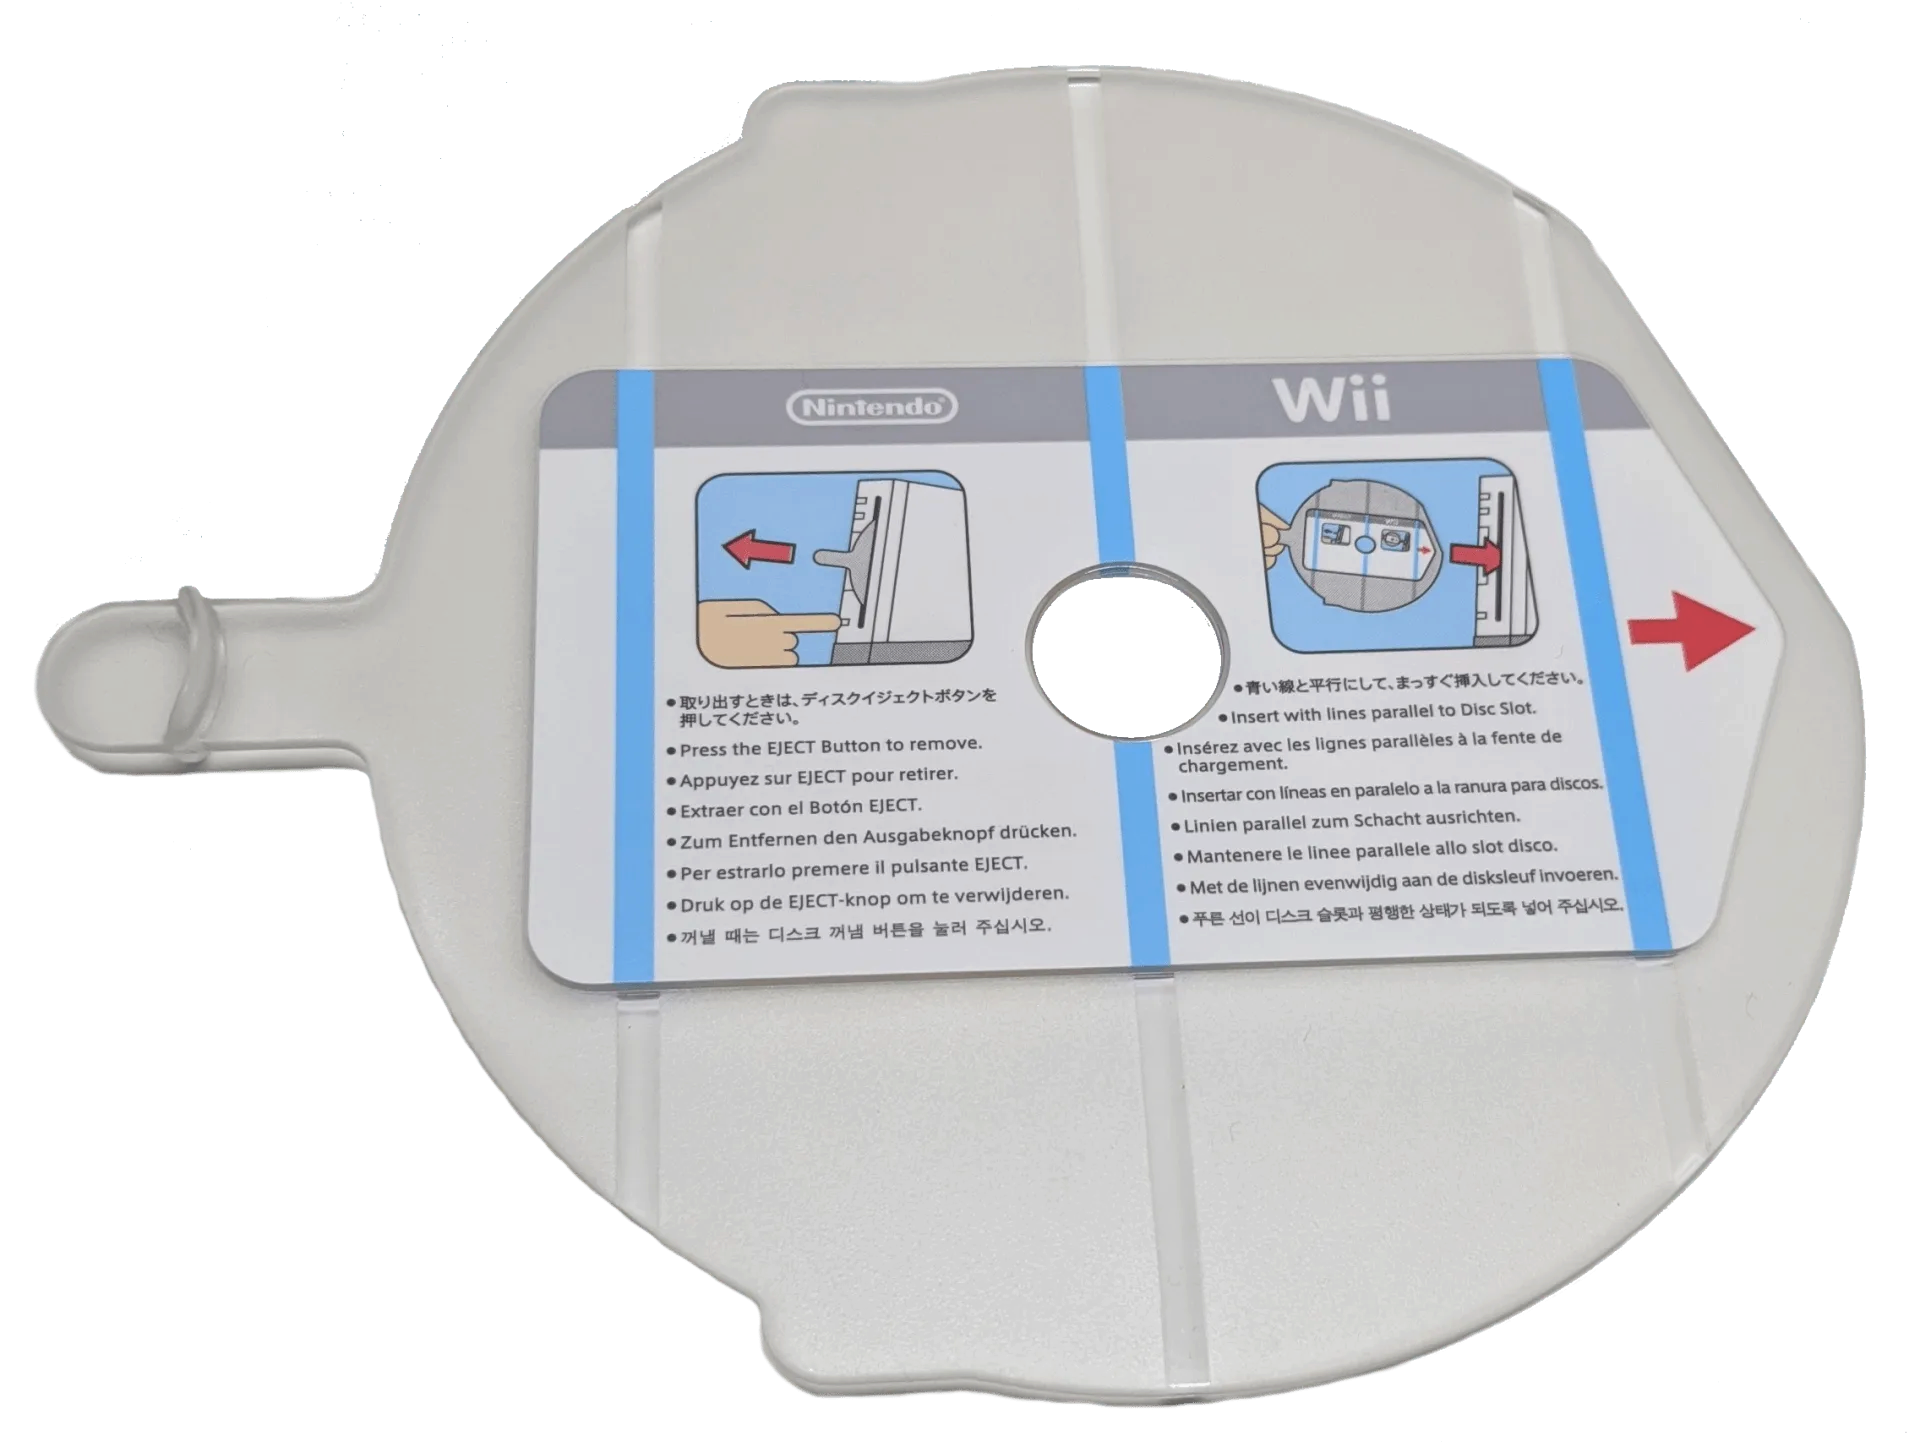  Nintendo Wii Cleaning Disk